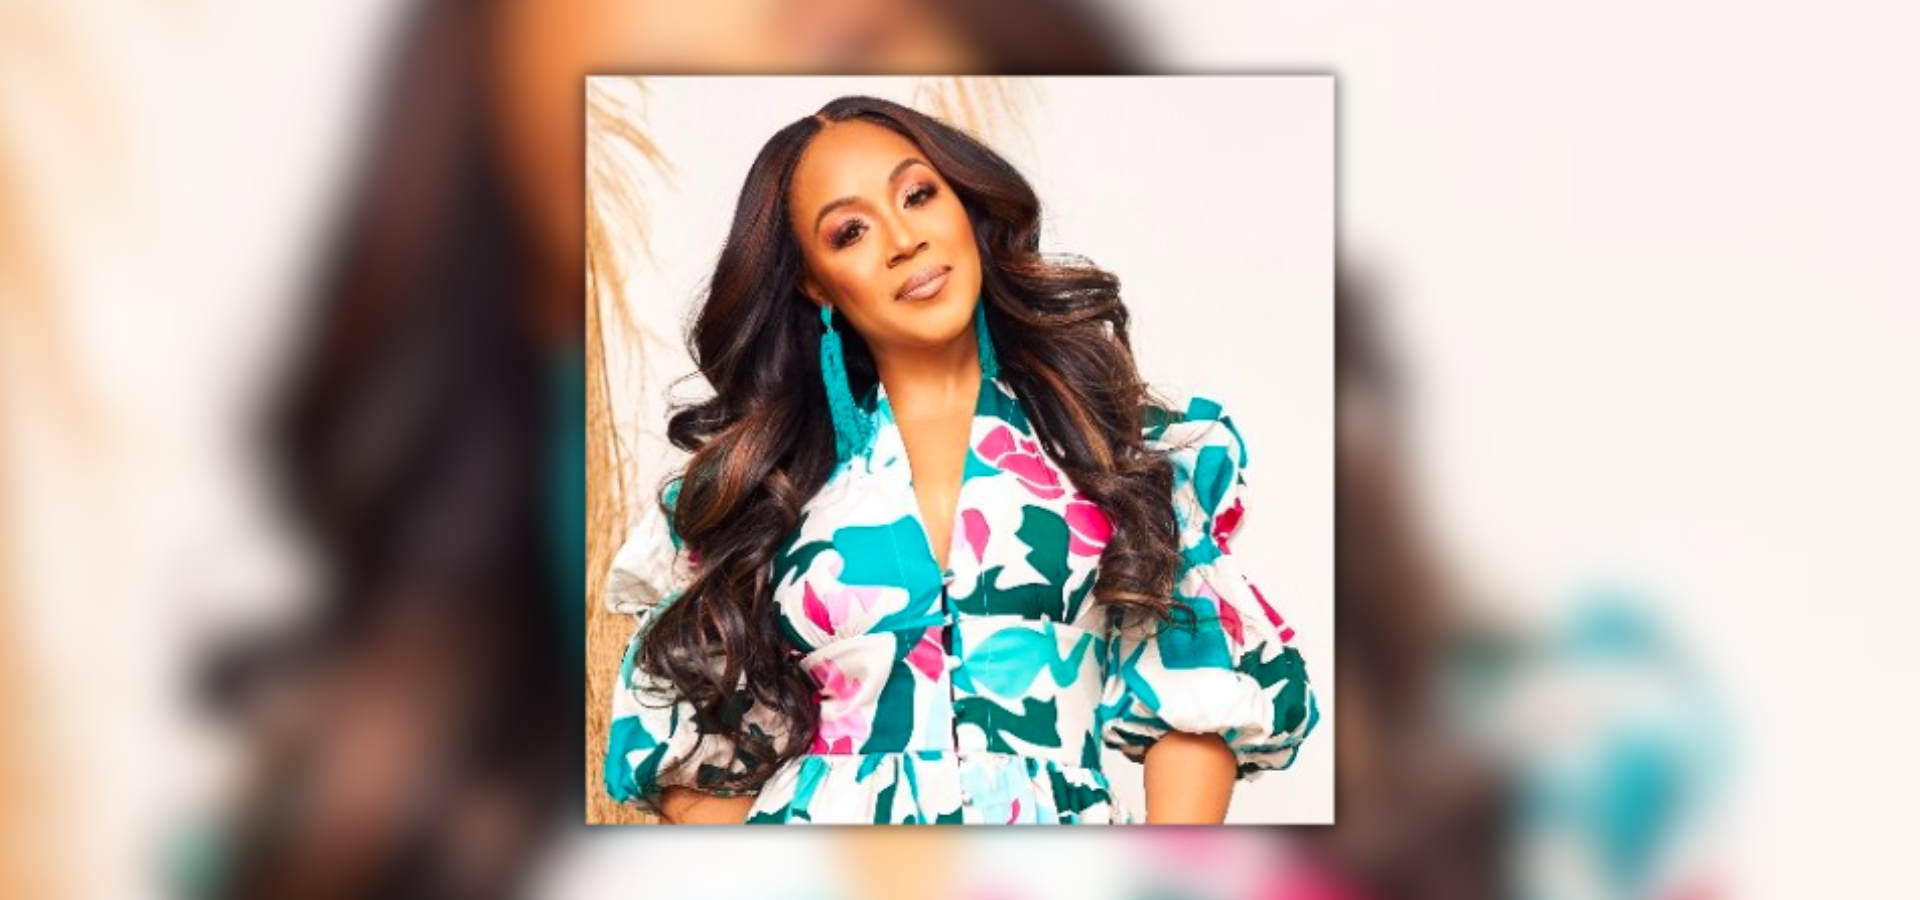 Erica Campbell and Sister Krista Land Brand Deal